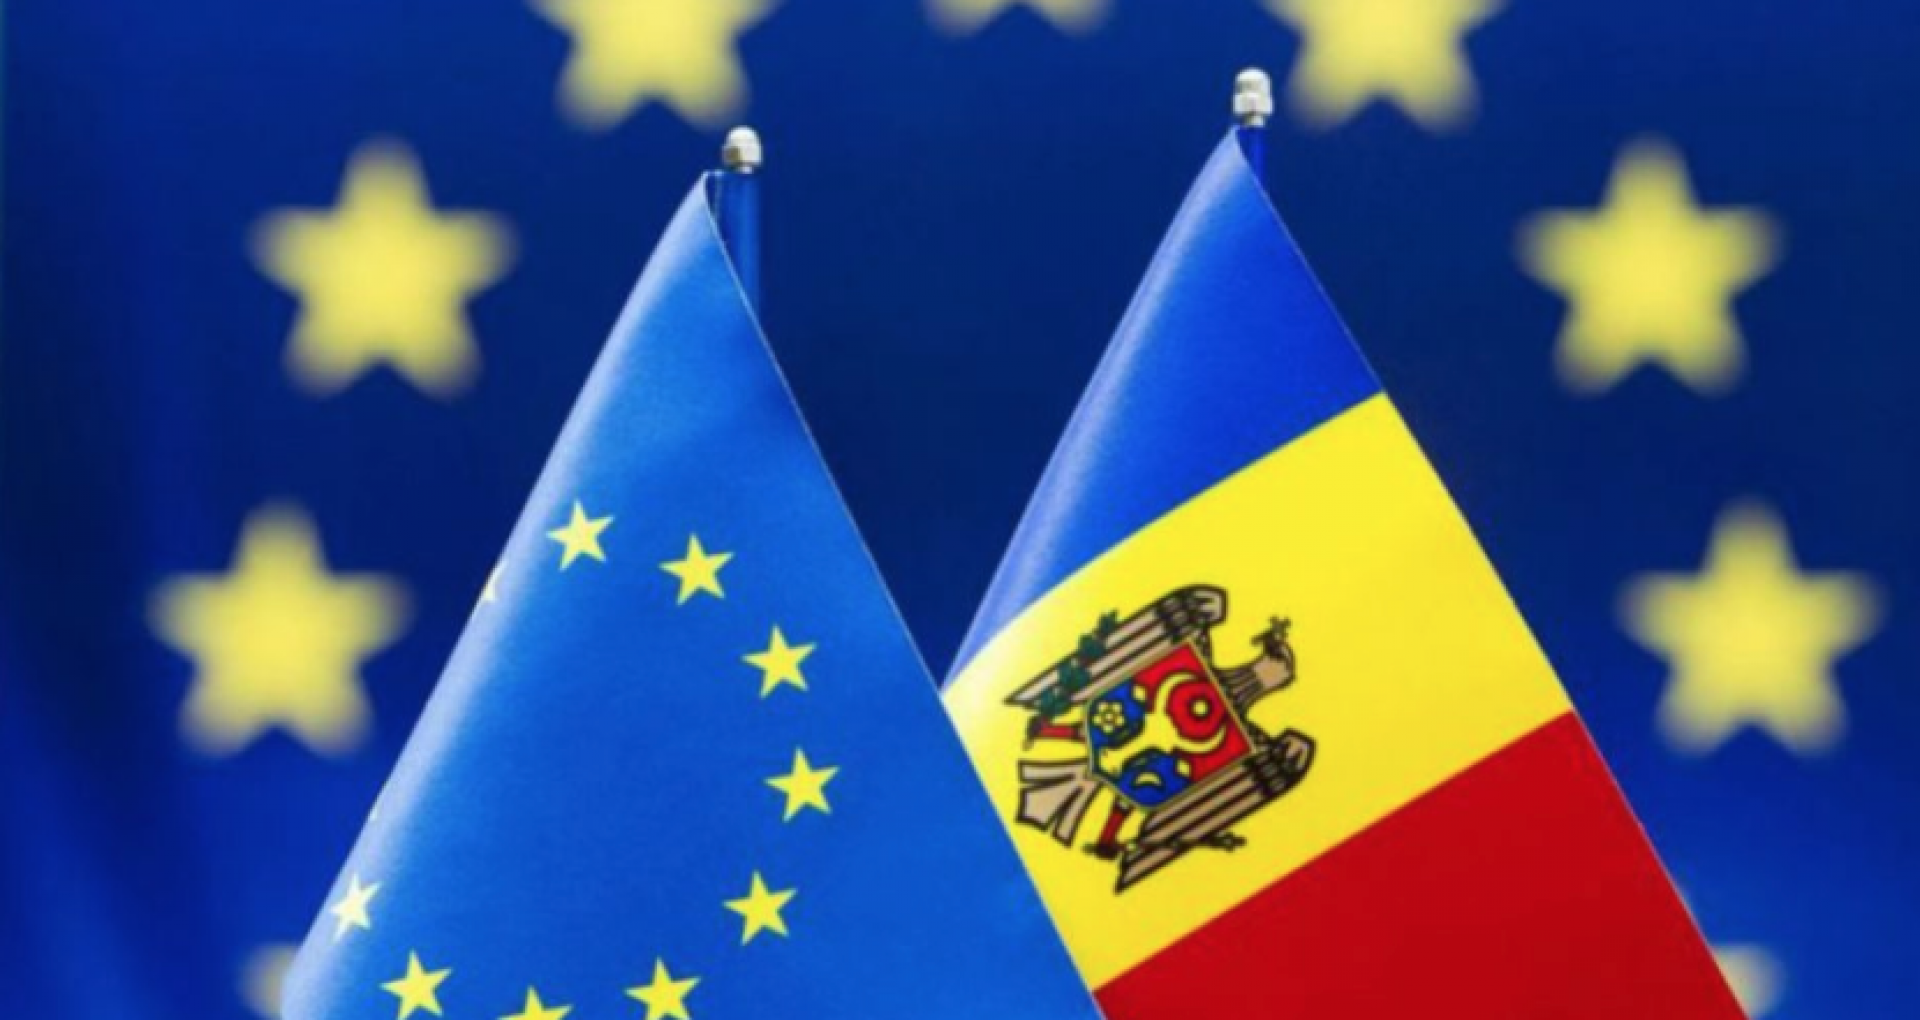 EU-Moldova Relations and Their Development Prospects Were Discussed During a High-level Visit of EU Officials to Chișinău